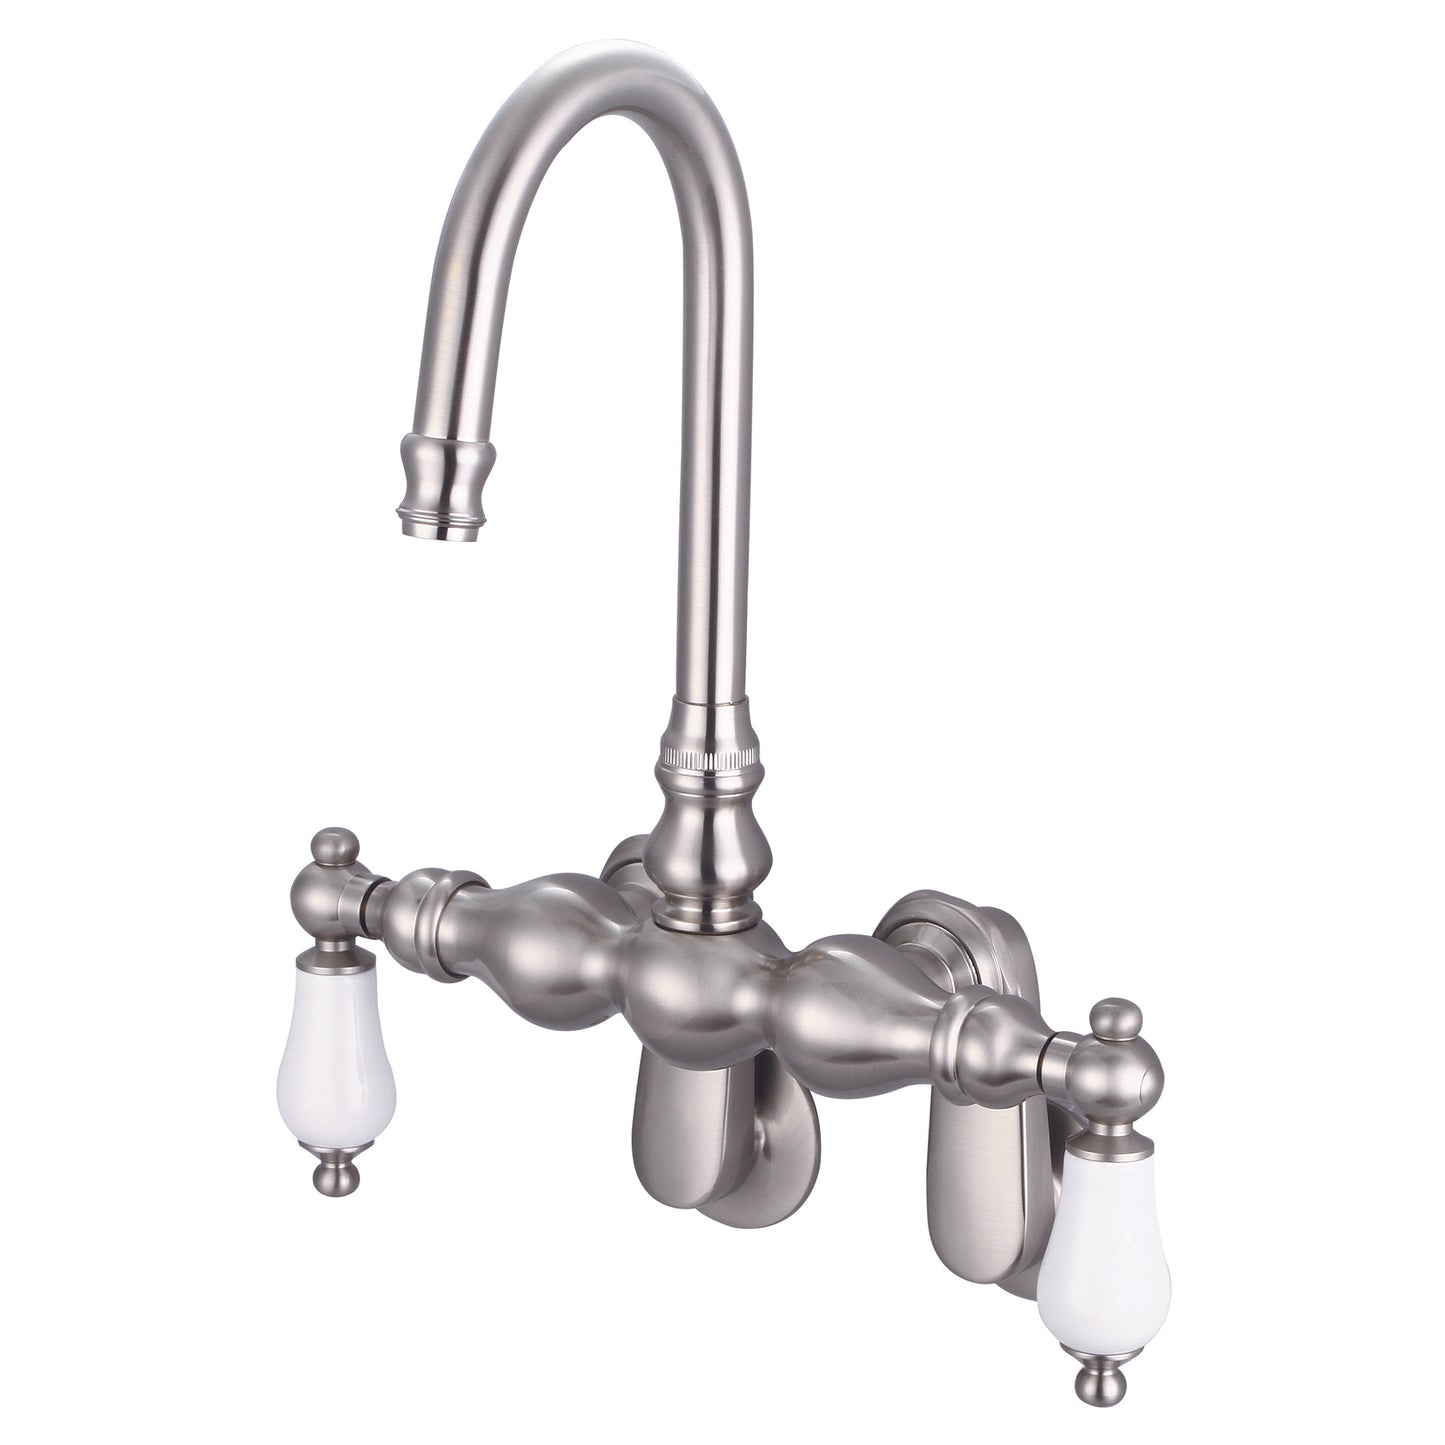 Vintage Classic Adjustable Spread Wall Mount Tub Faucet With Gooseneck Spout & Swivel Wall Connector in Brushed Nickel Finish, With Porcelain Lever Handles Without labels